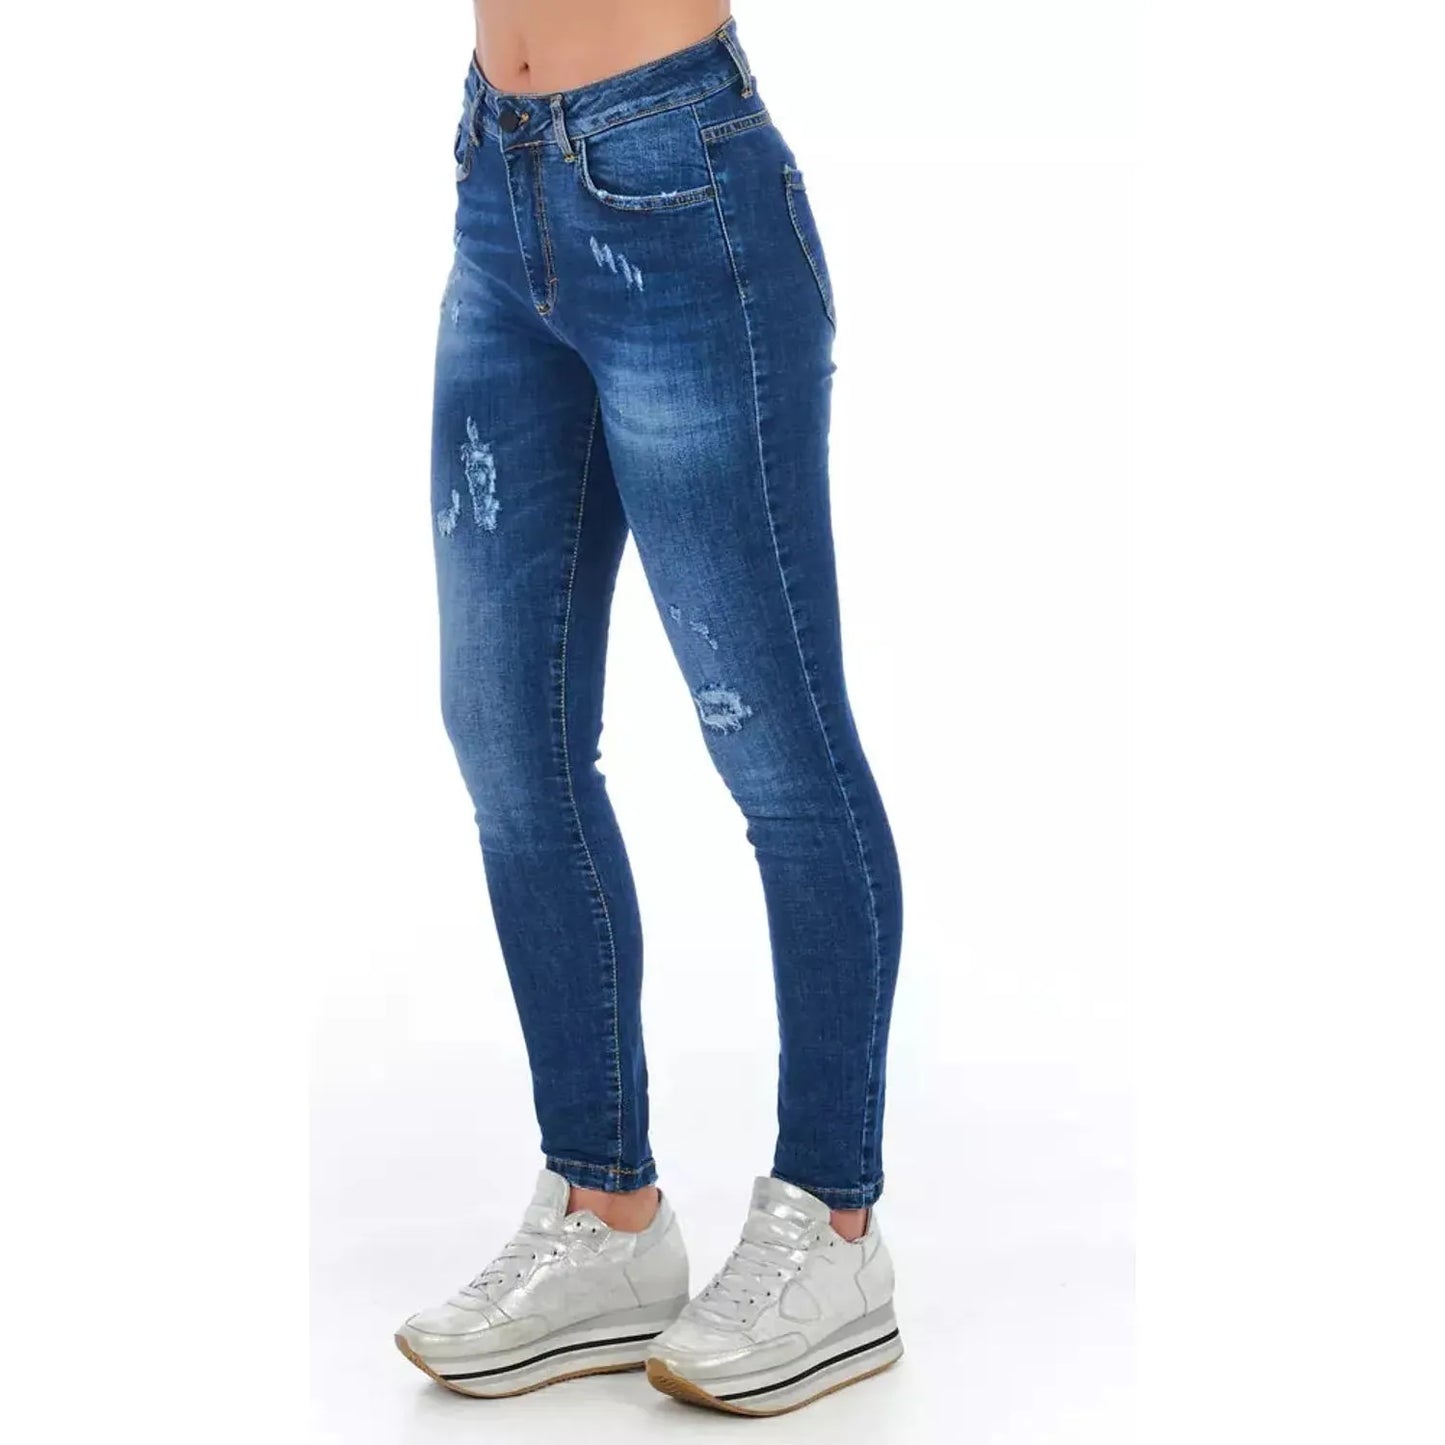 Frankie Morello Chic Worn Wash Denim Jeans for Sophisticated Style blue-jeans-pant-5 product-21771-844930453-23-73b35b13-c35.webp